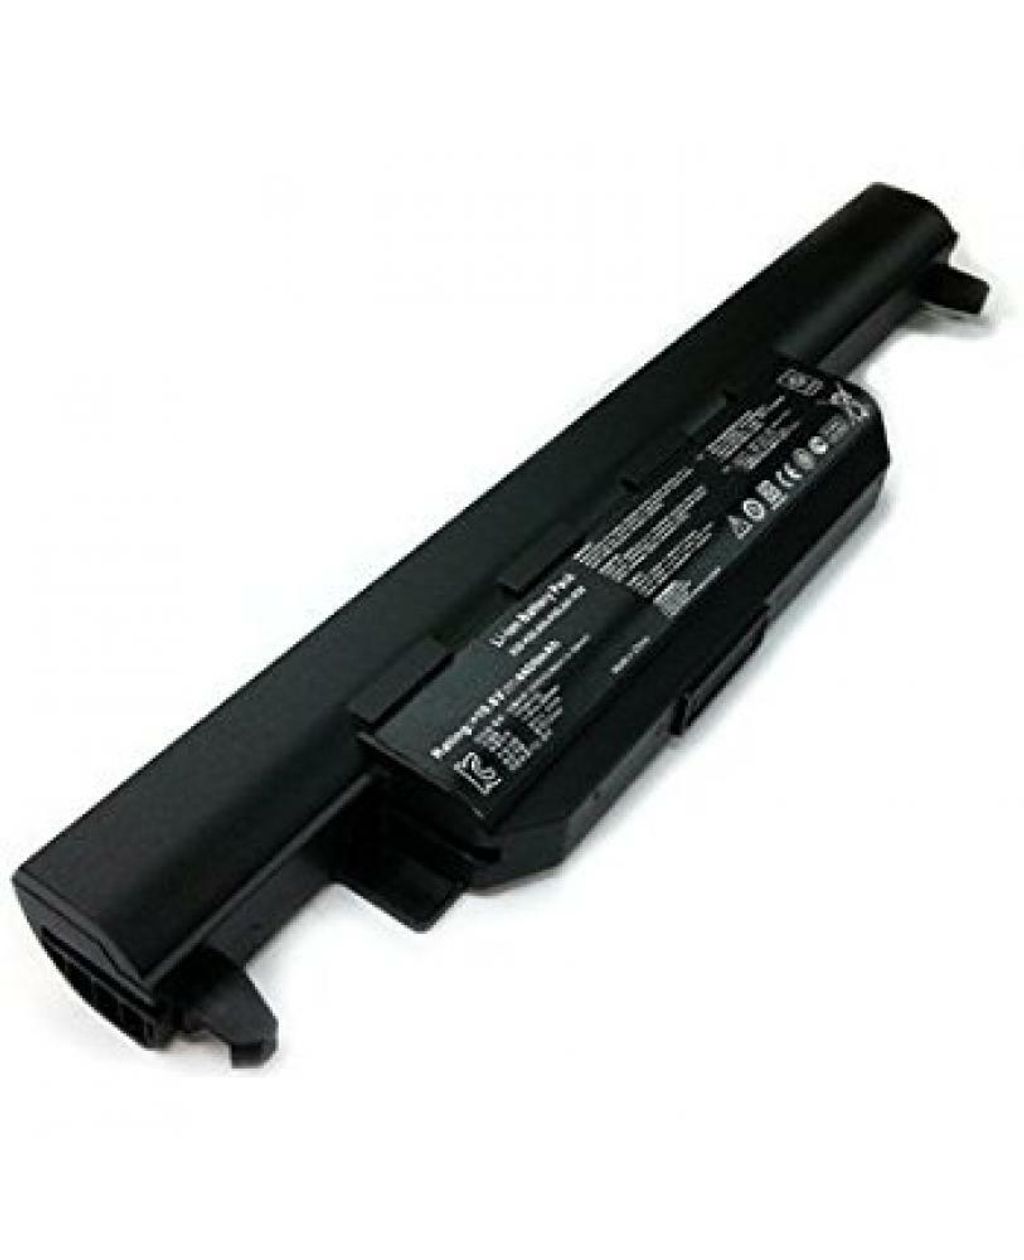 irv-lap-asus-battery-a32-k55-dealclear-img4-813x1000